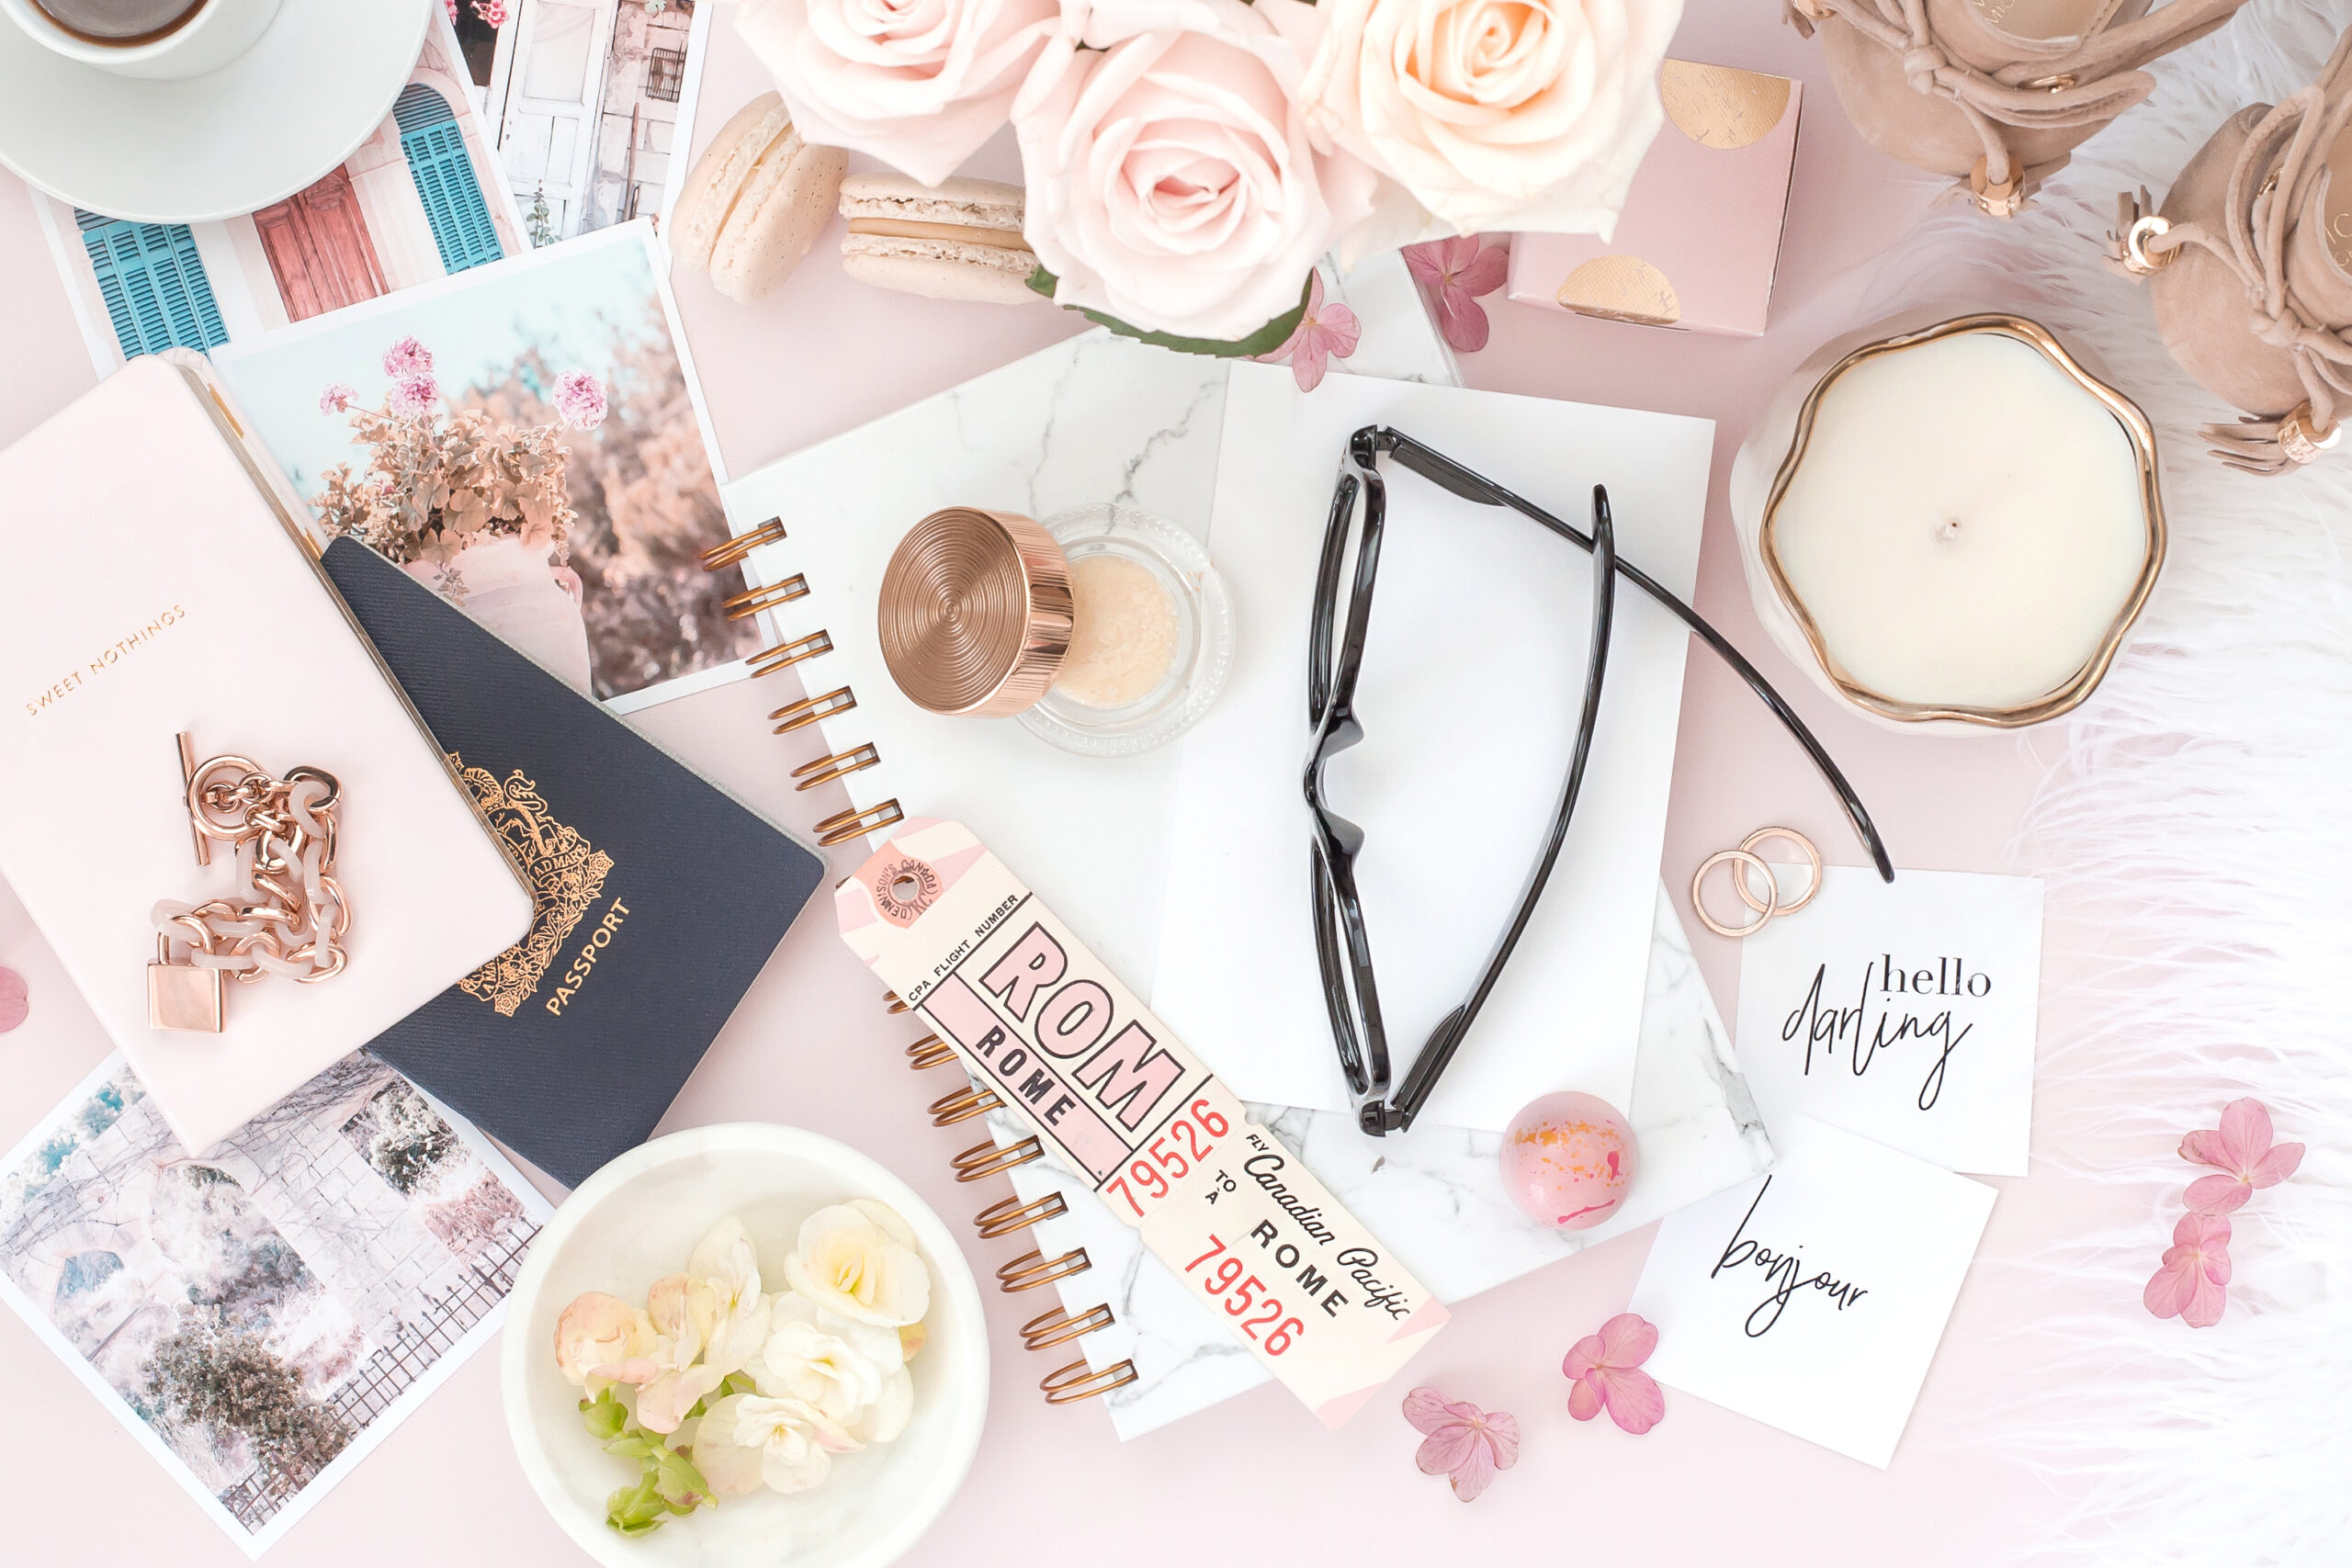 flatlay of items including a journal, a passport, glasses, and pink flowers